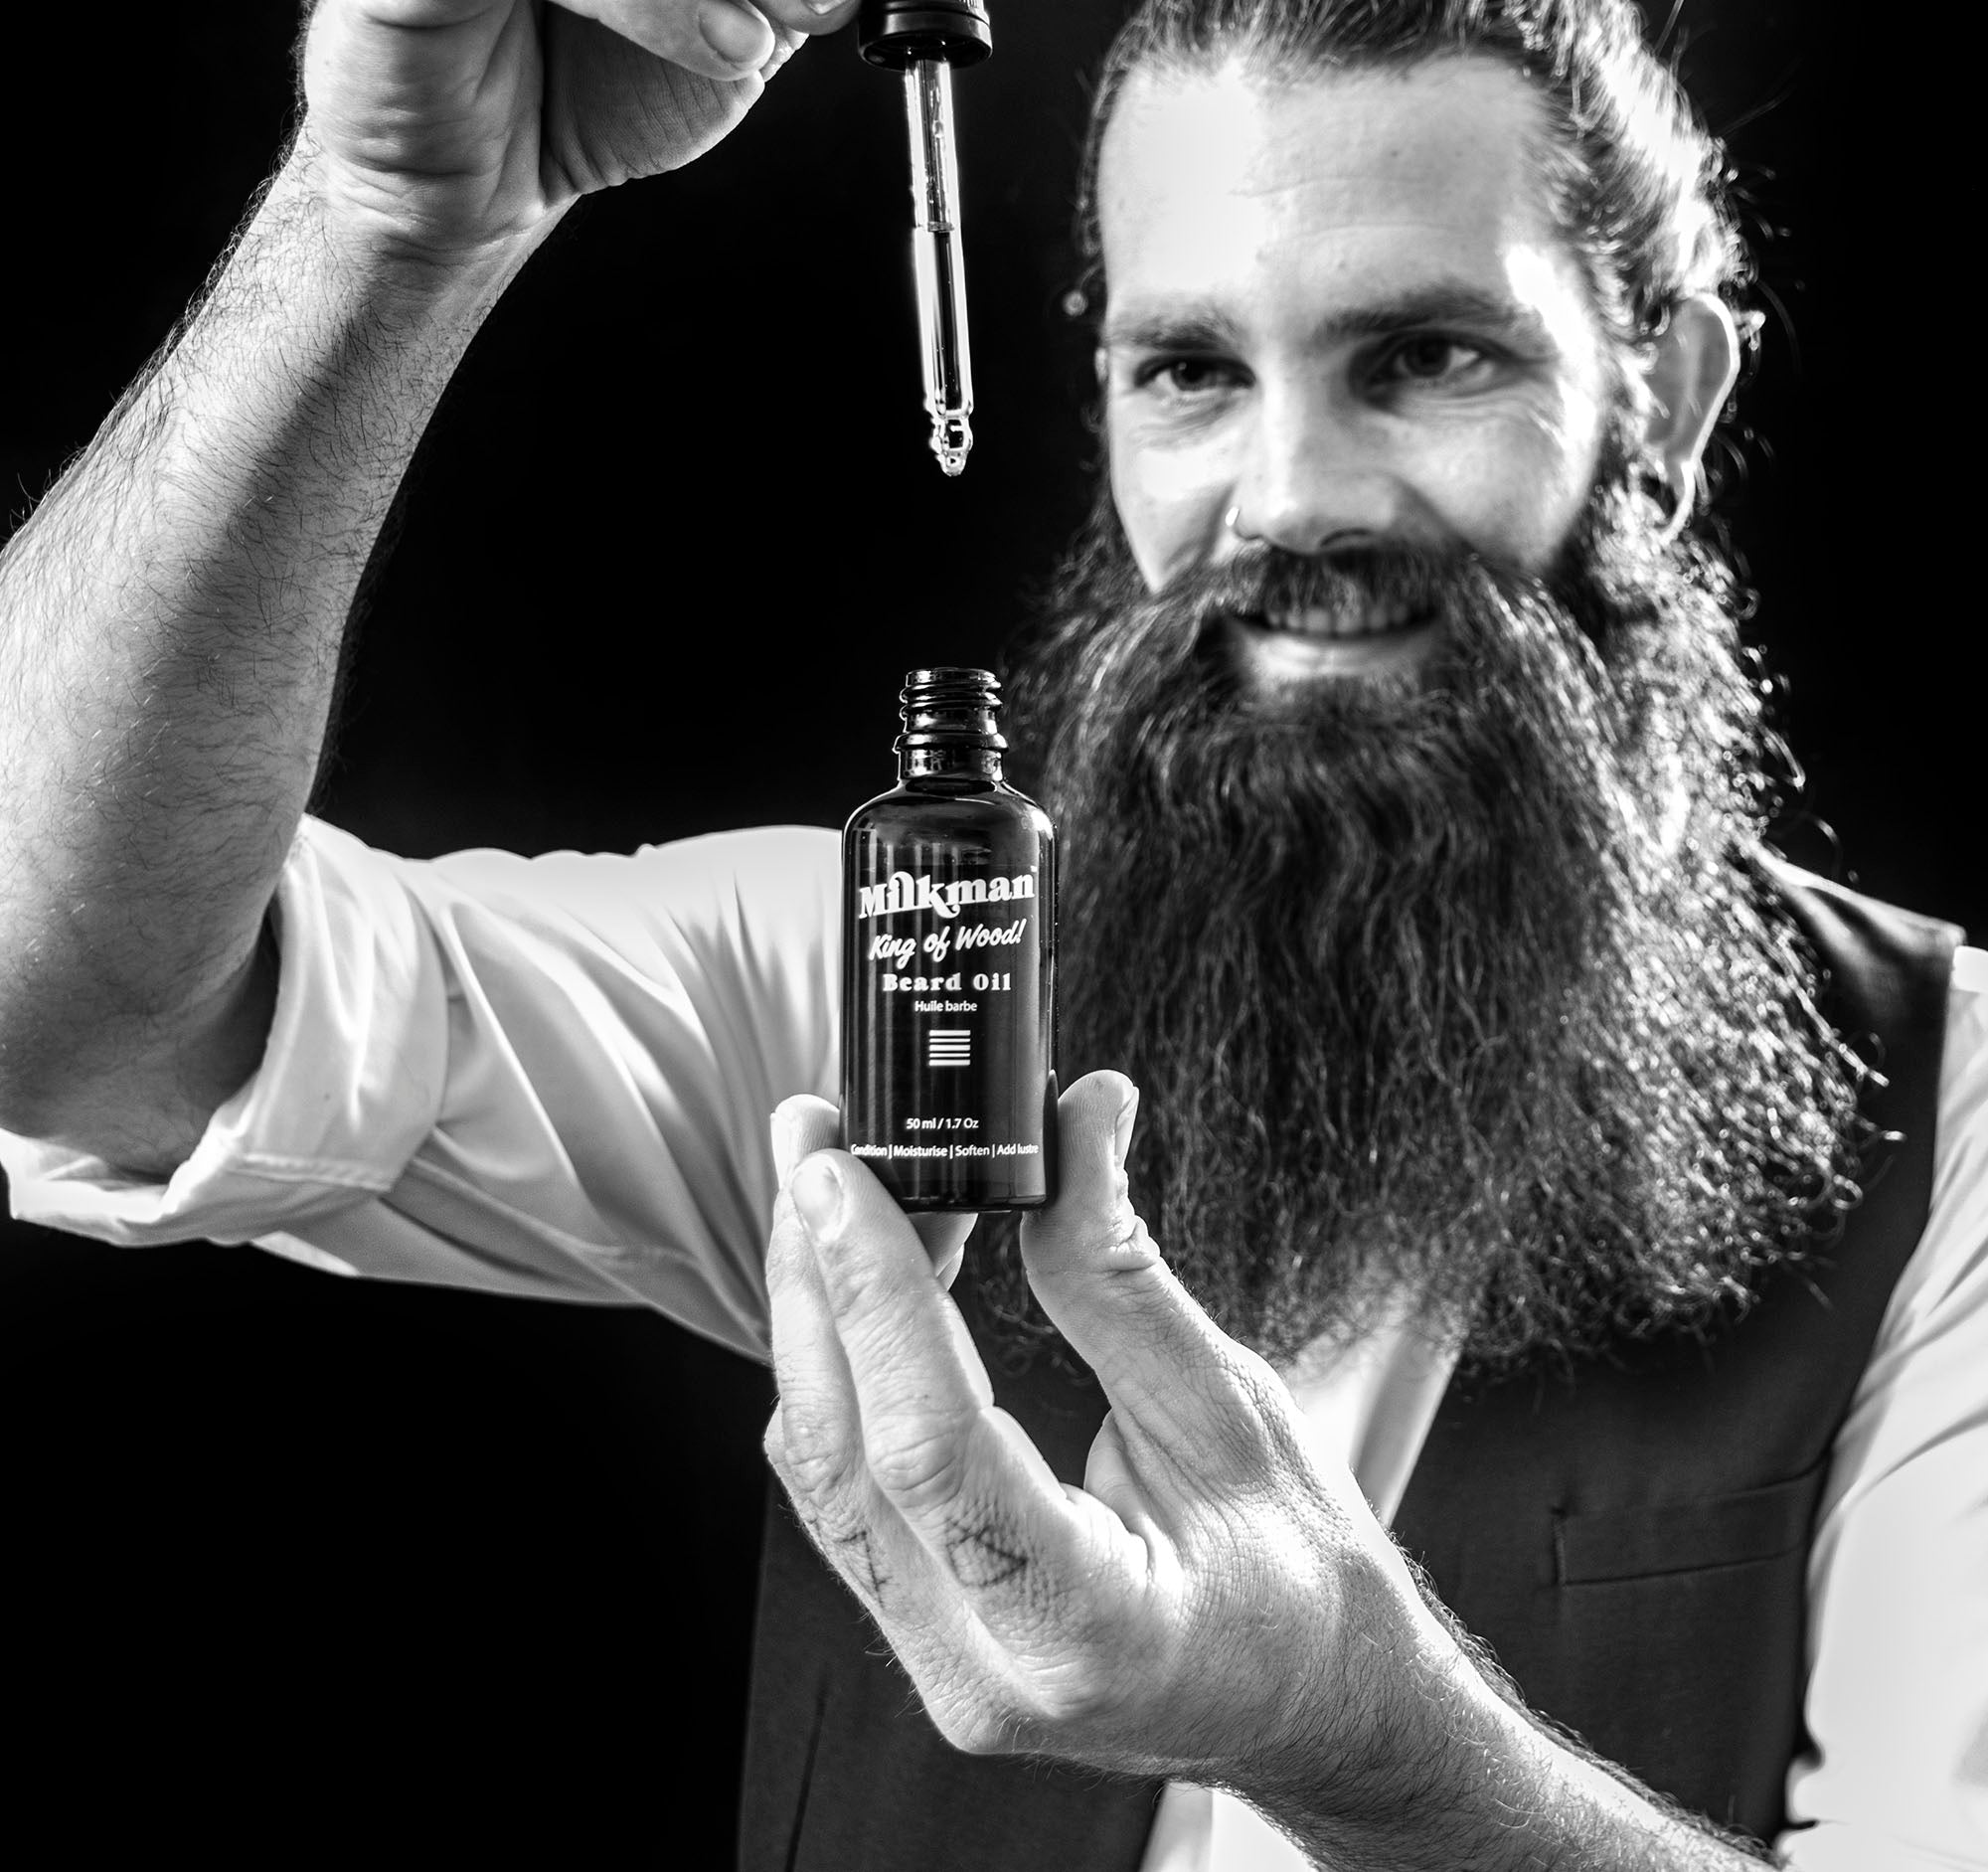 Johnny_with_King_of_Wood_Beard_Oil_black_and_white.jpg